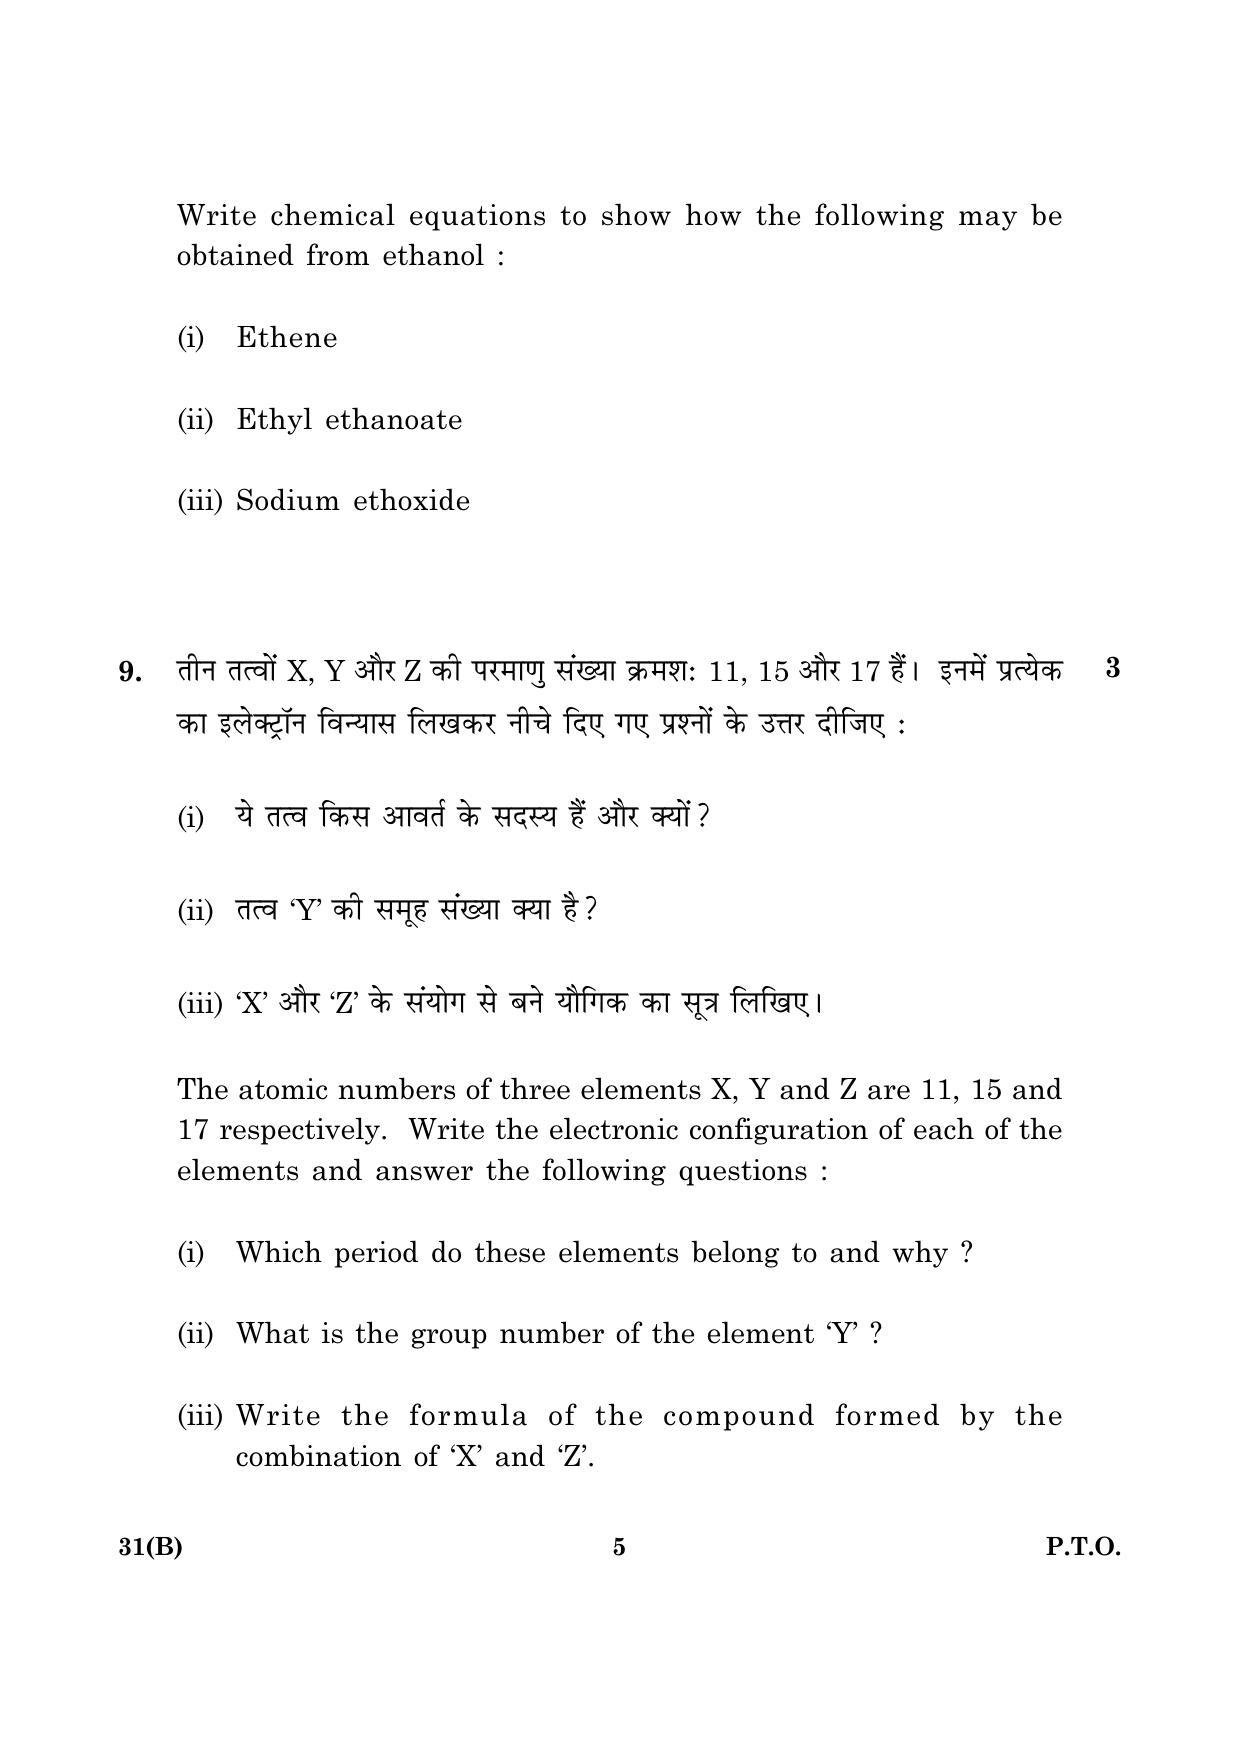 CBSE Class 10 031(B) Science 2016 Question Paper - Page 5